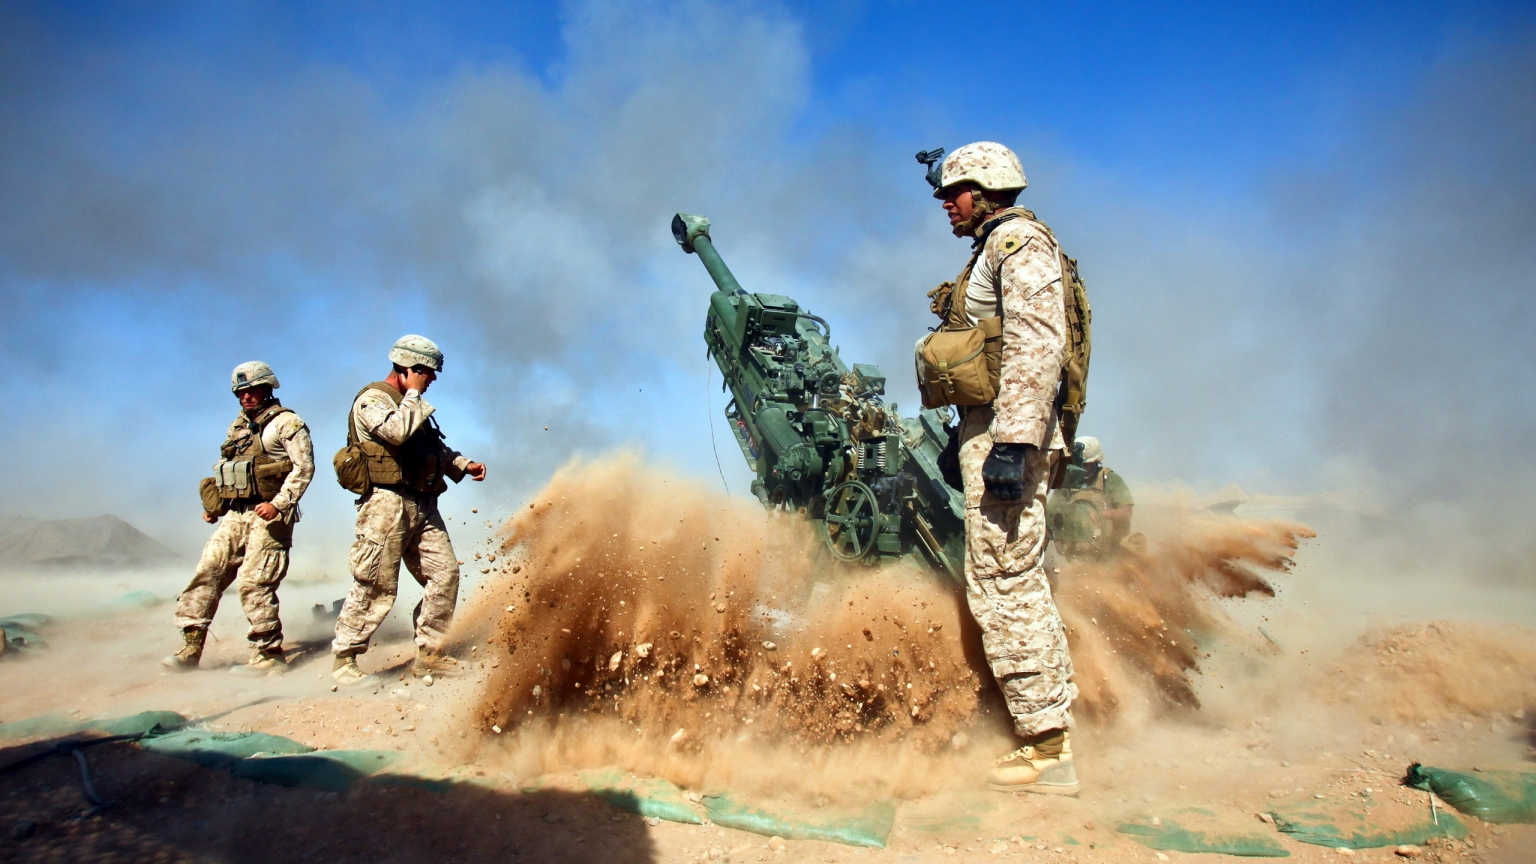 Howitzer and Soldiers for 1536 x 864 HDTV resolution